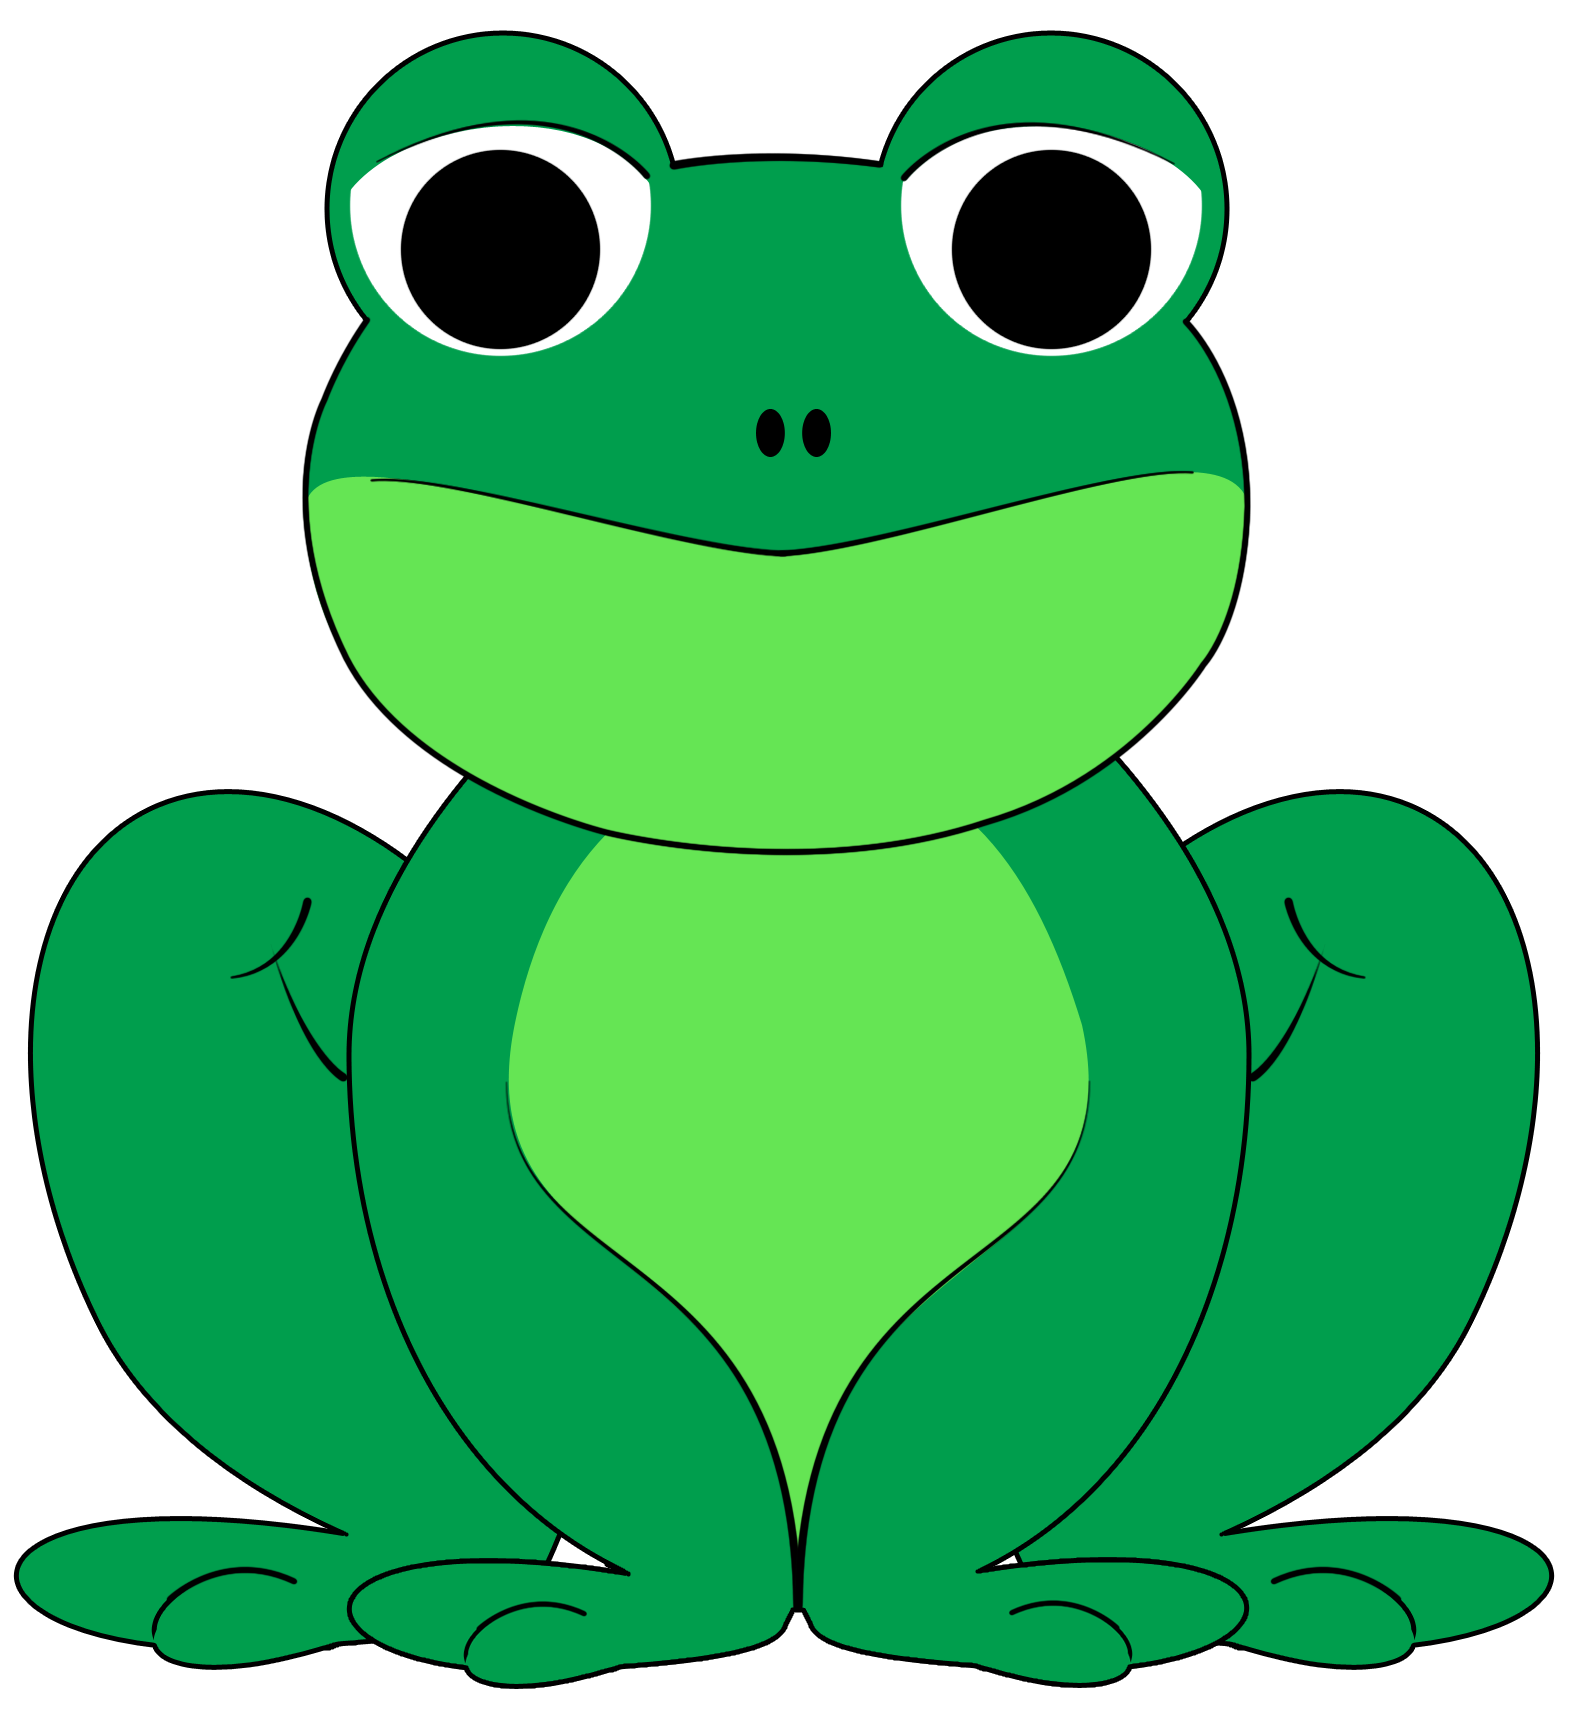 Frogs Cartoon Pictures - ClipArt Best